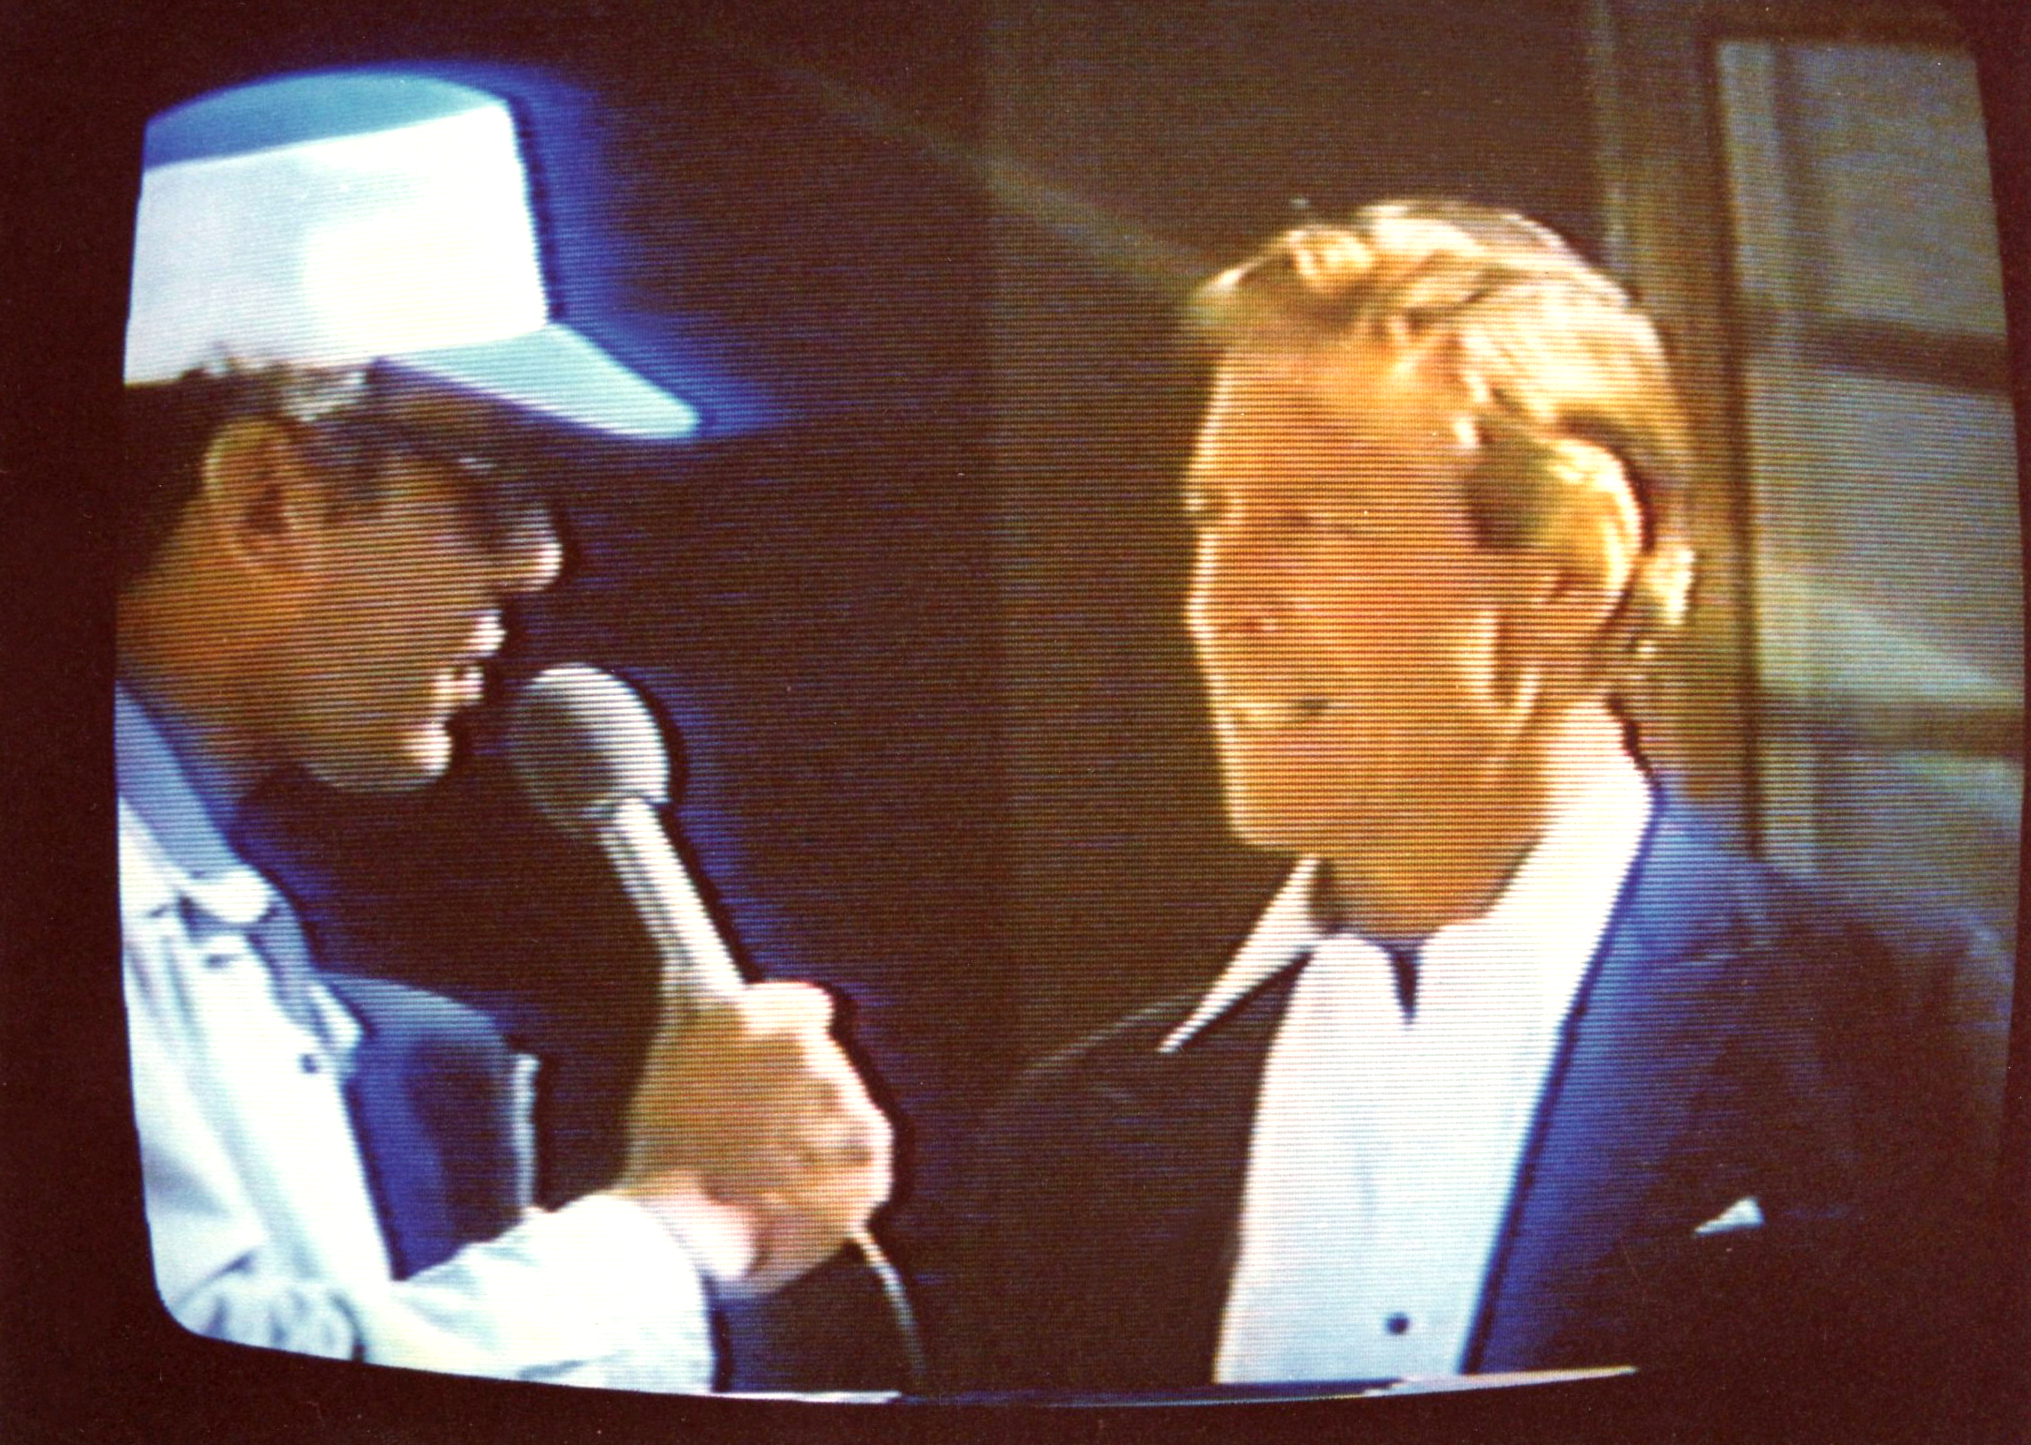 Interviewing actor James Franciscus on set in San Francisco in 1981. He was playing JFK in a Tv movie